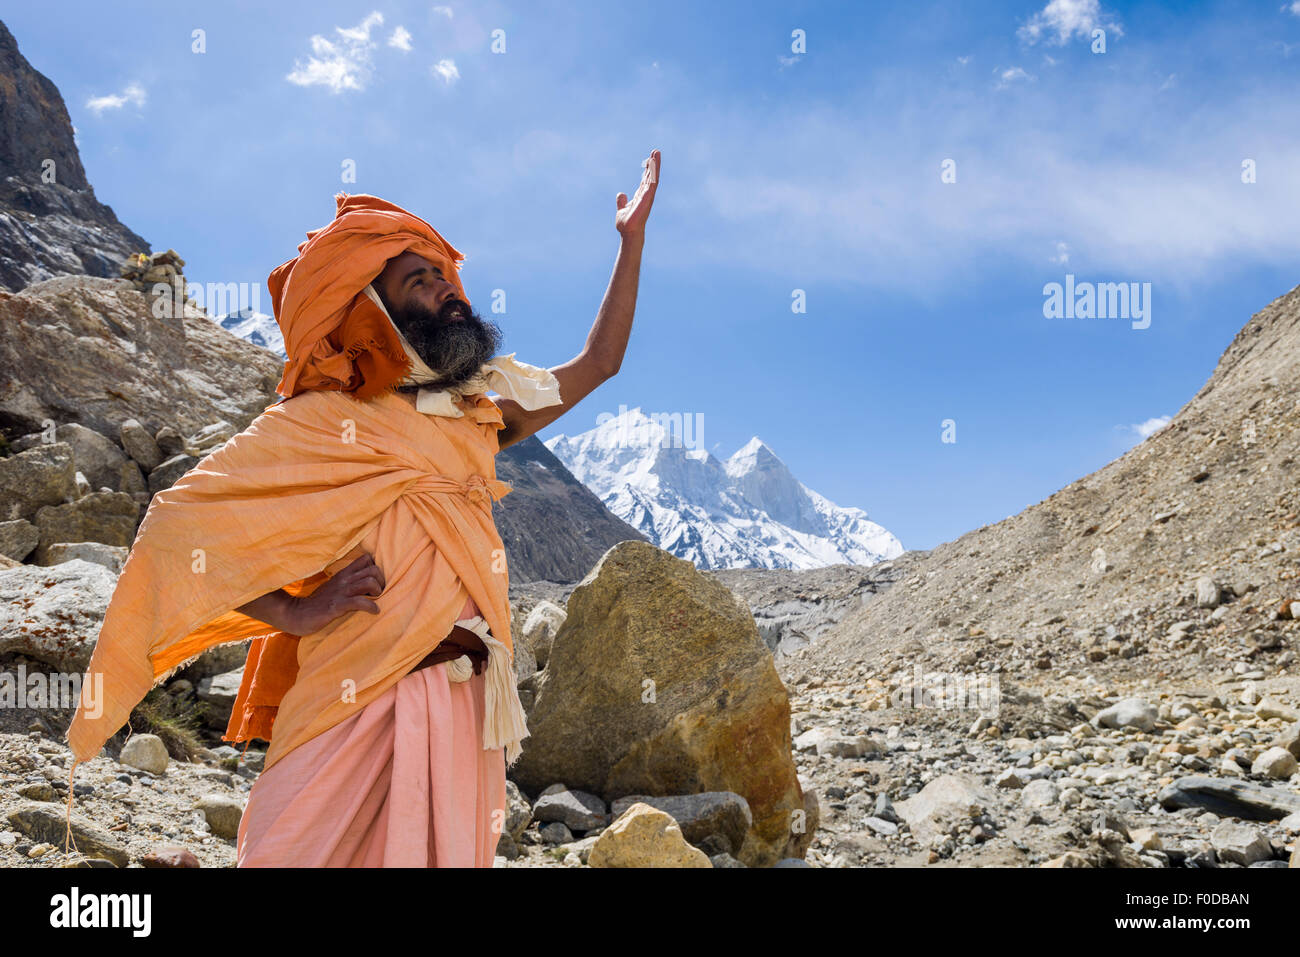 A Sadhu, holy man, is standing and praying at Gaumukh, the main source of the holy river Ganges, Gangotri, Uttarakhand, India Stock Photo